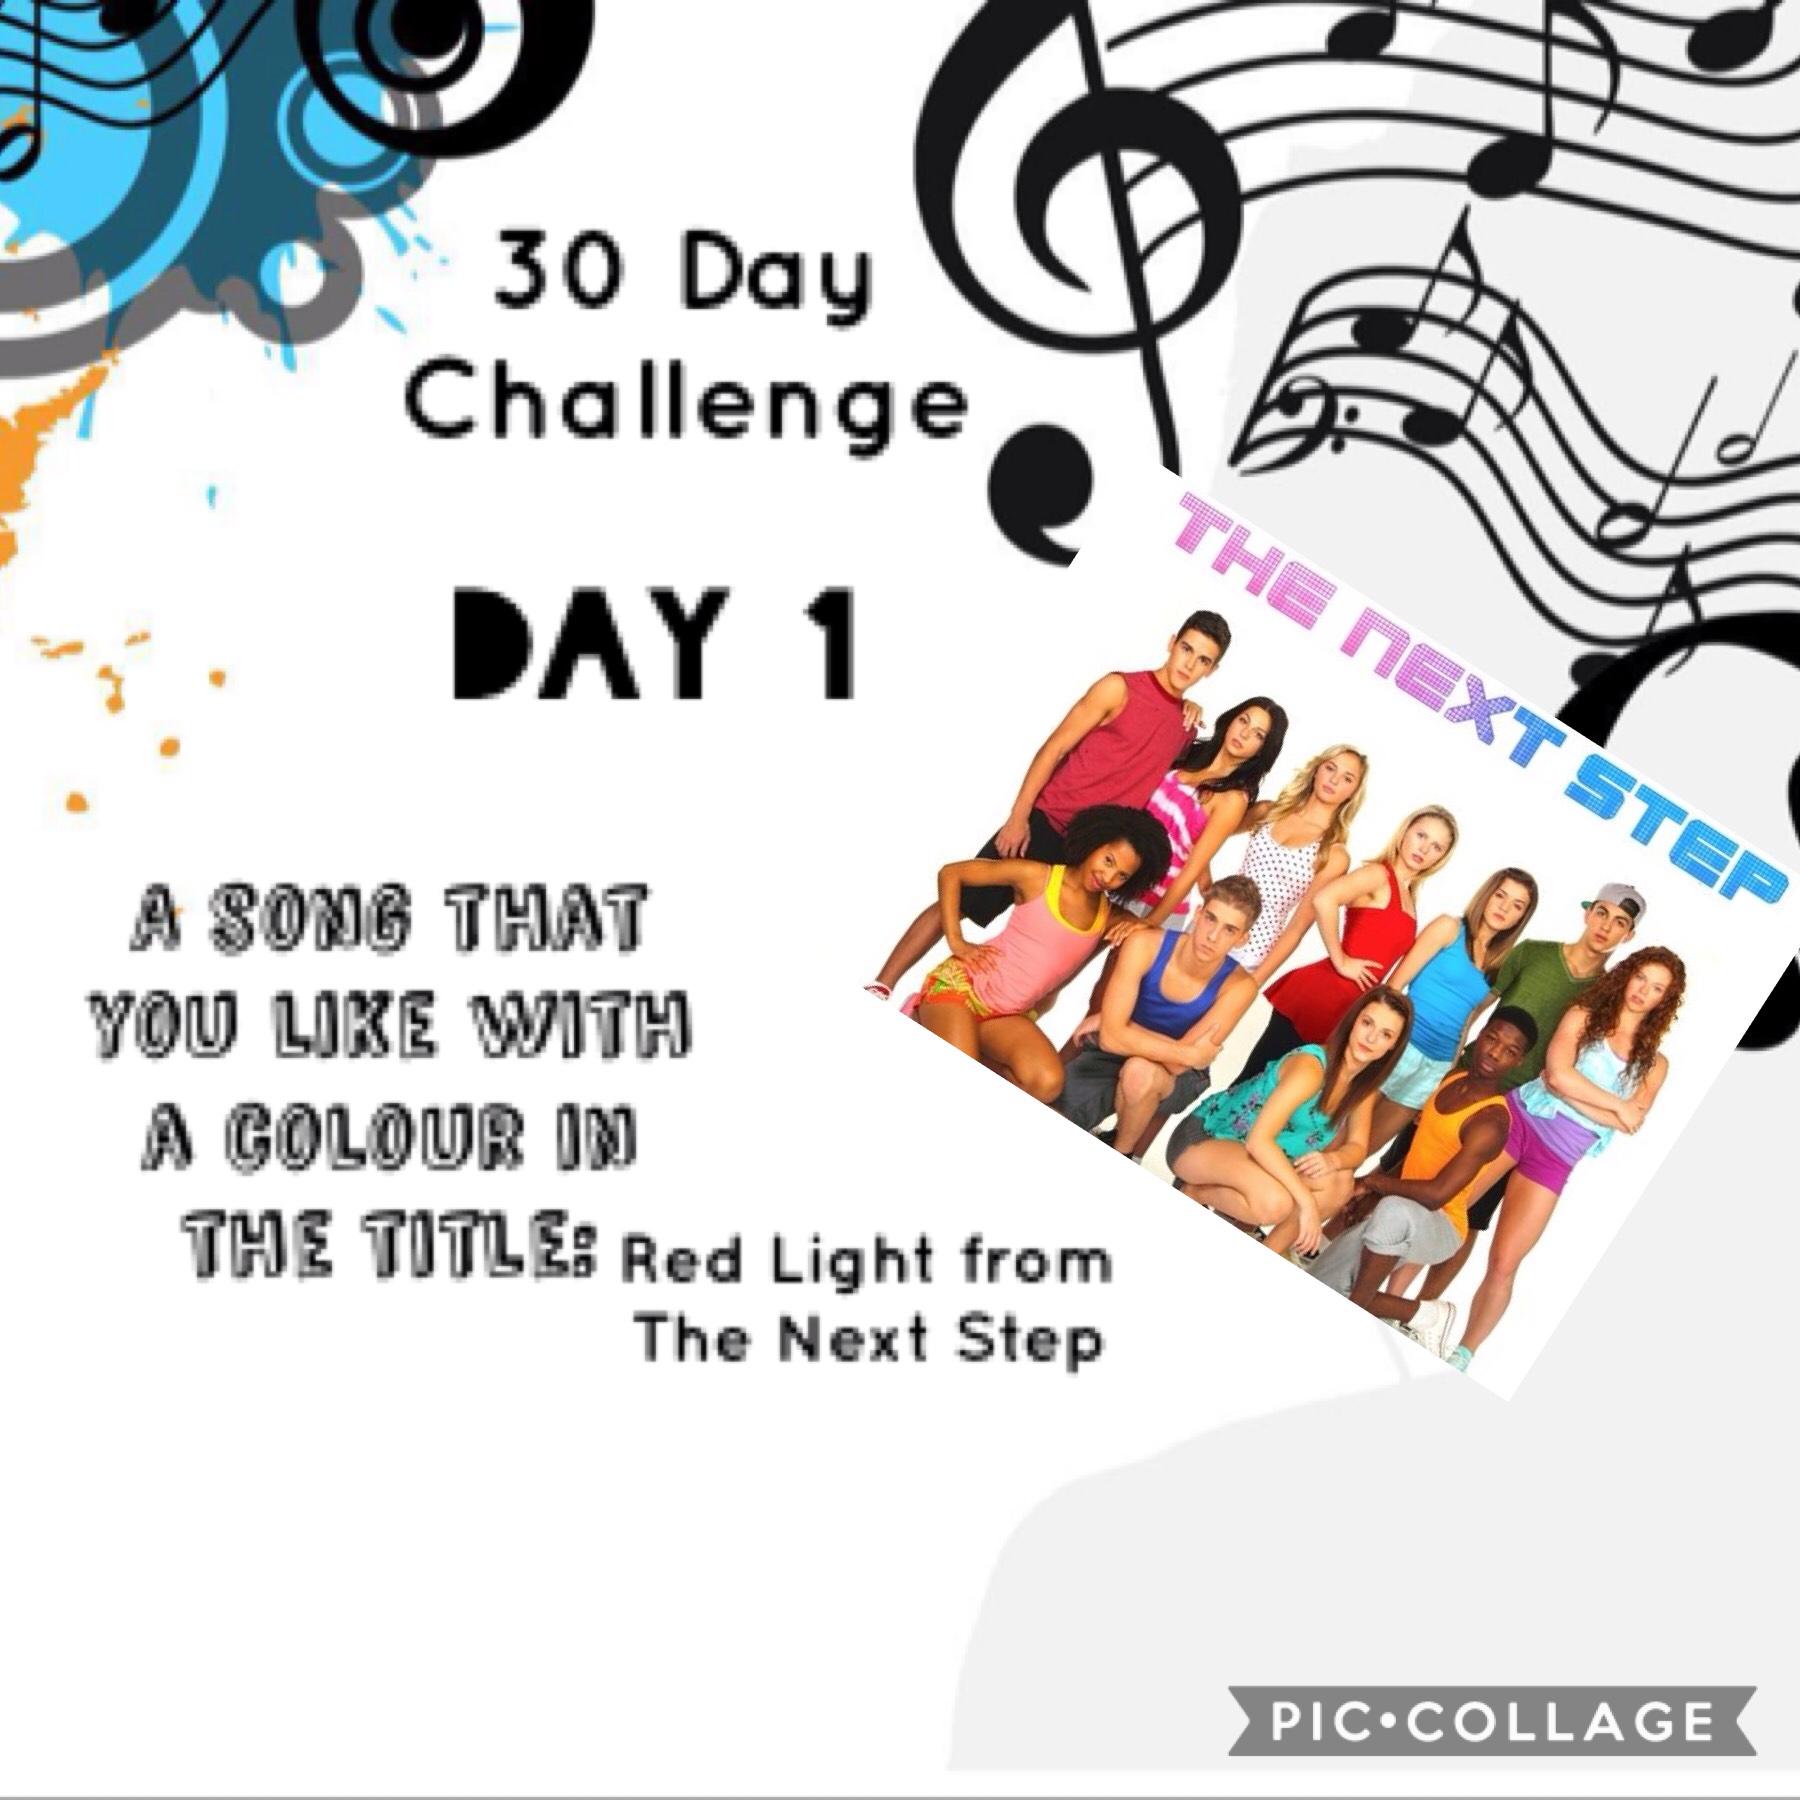 30 Day Challenge: Day 1